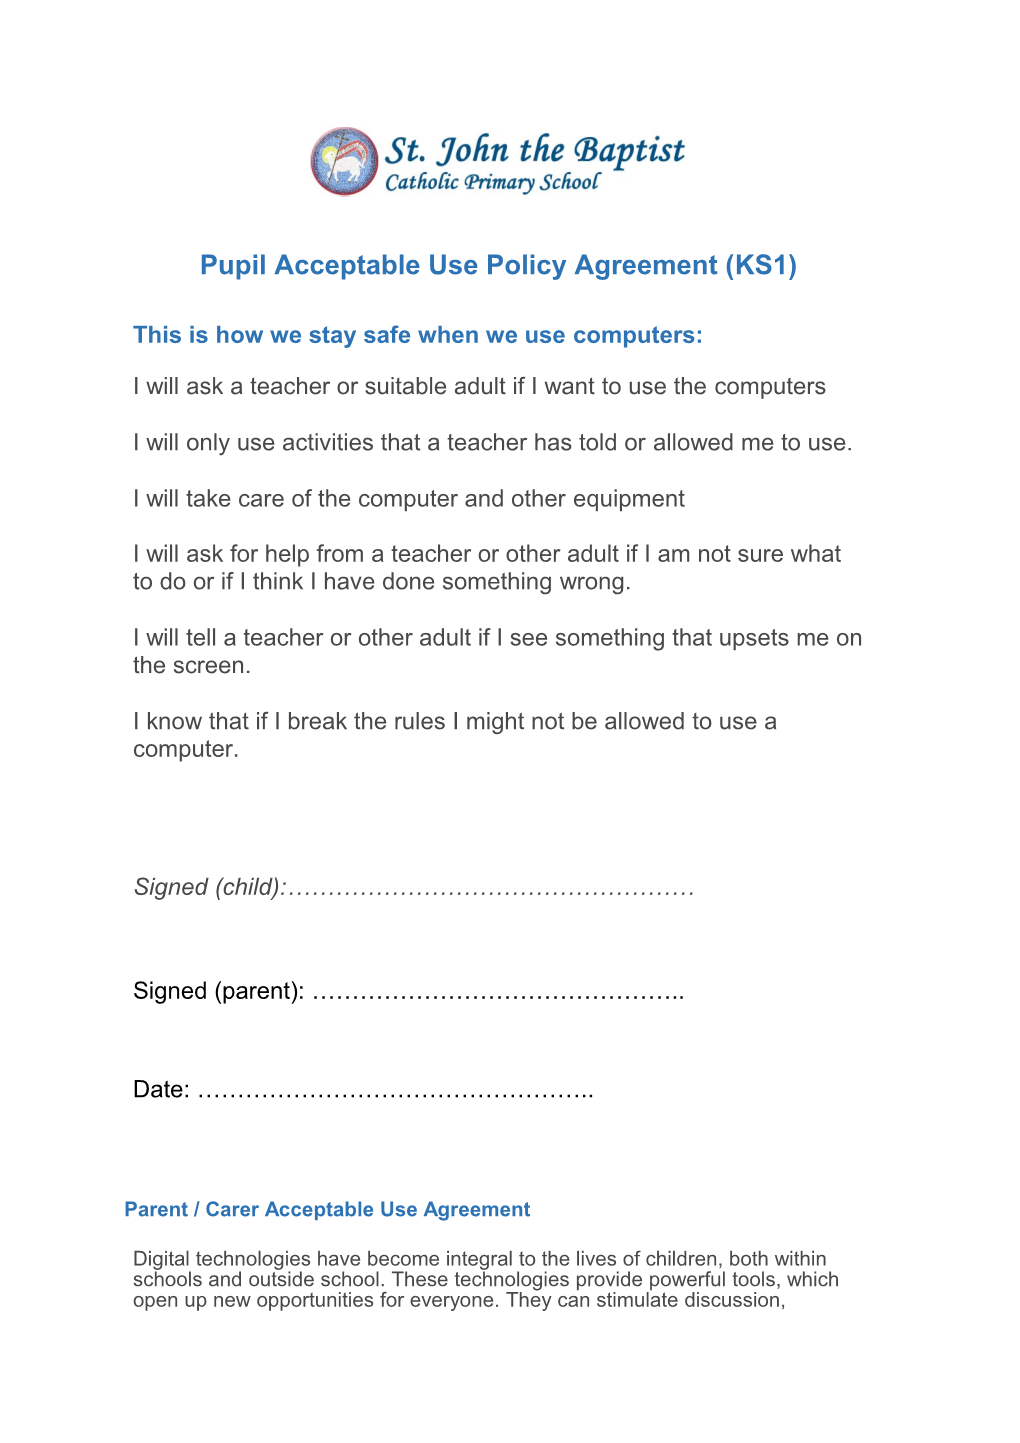 Pupil Acceptable Use Policy Agreement (KS1)